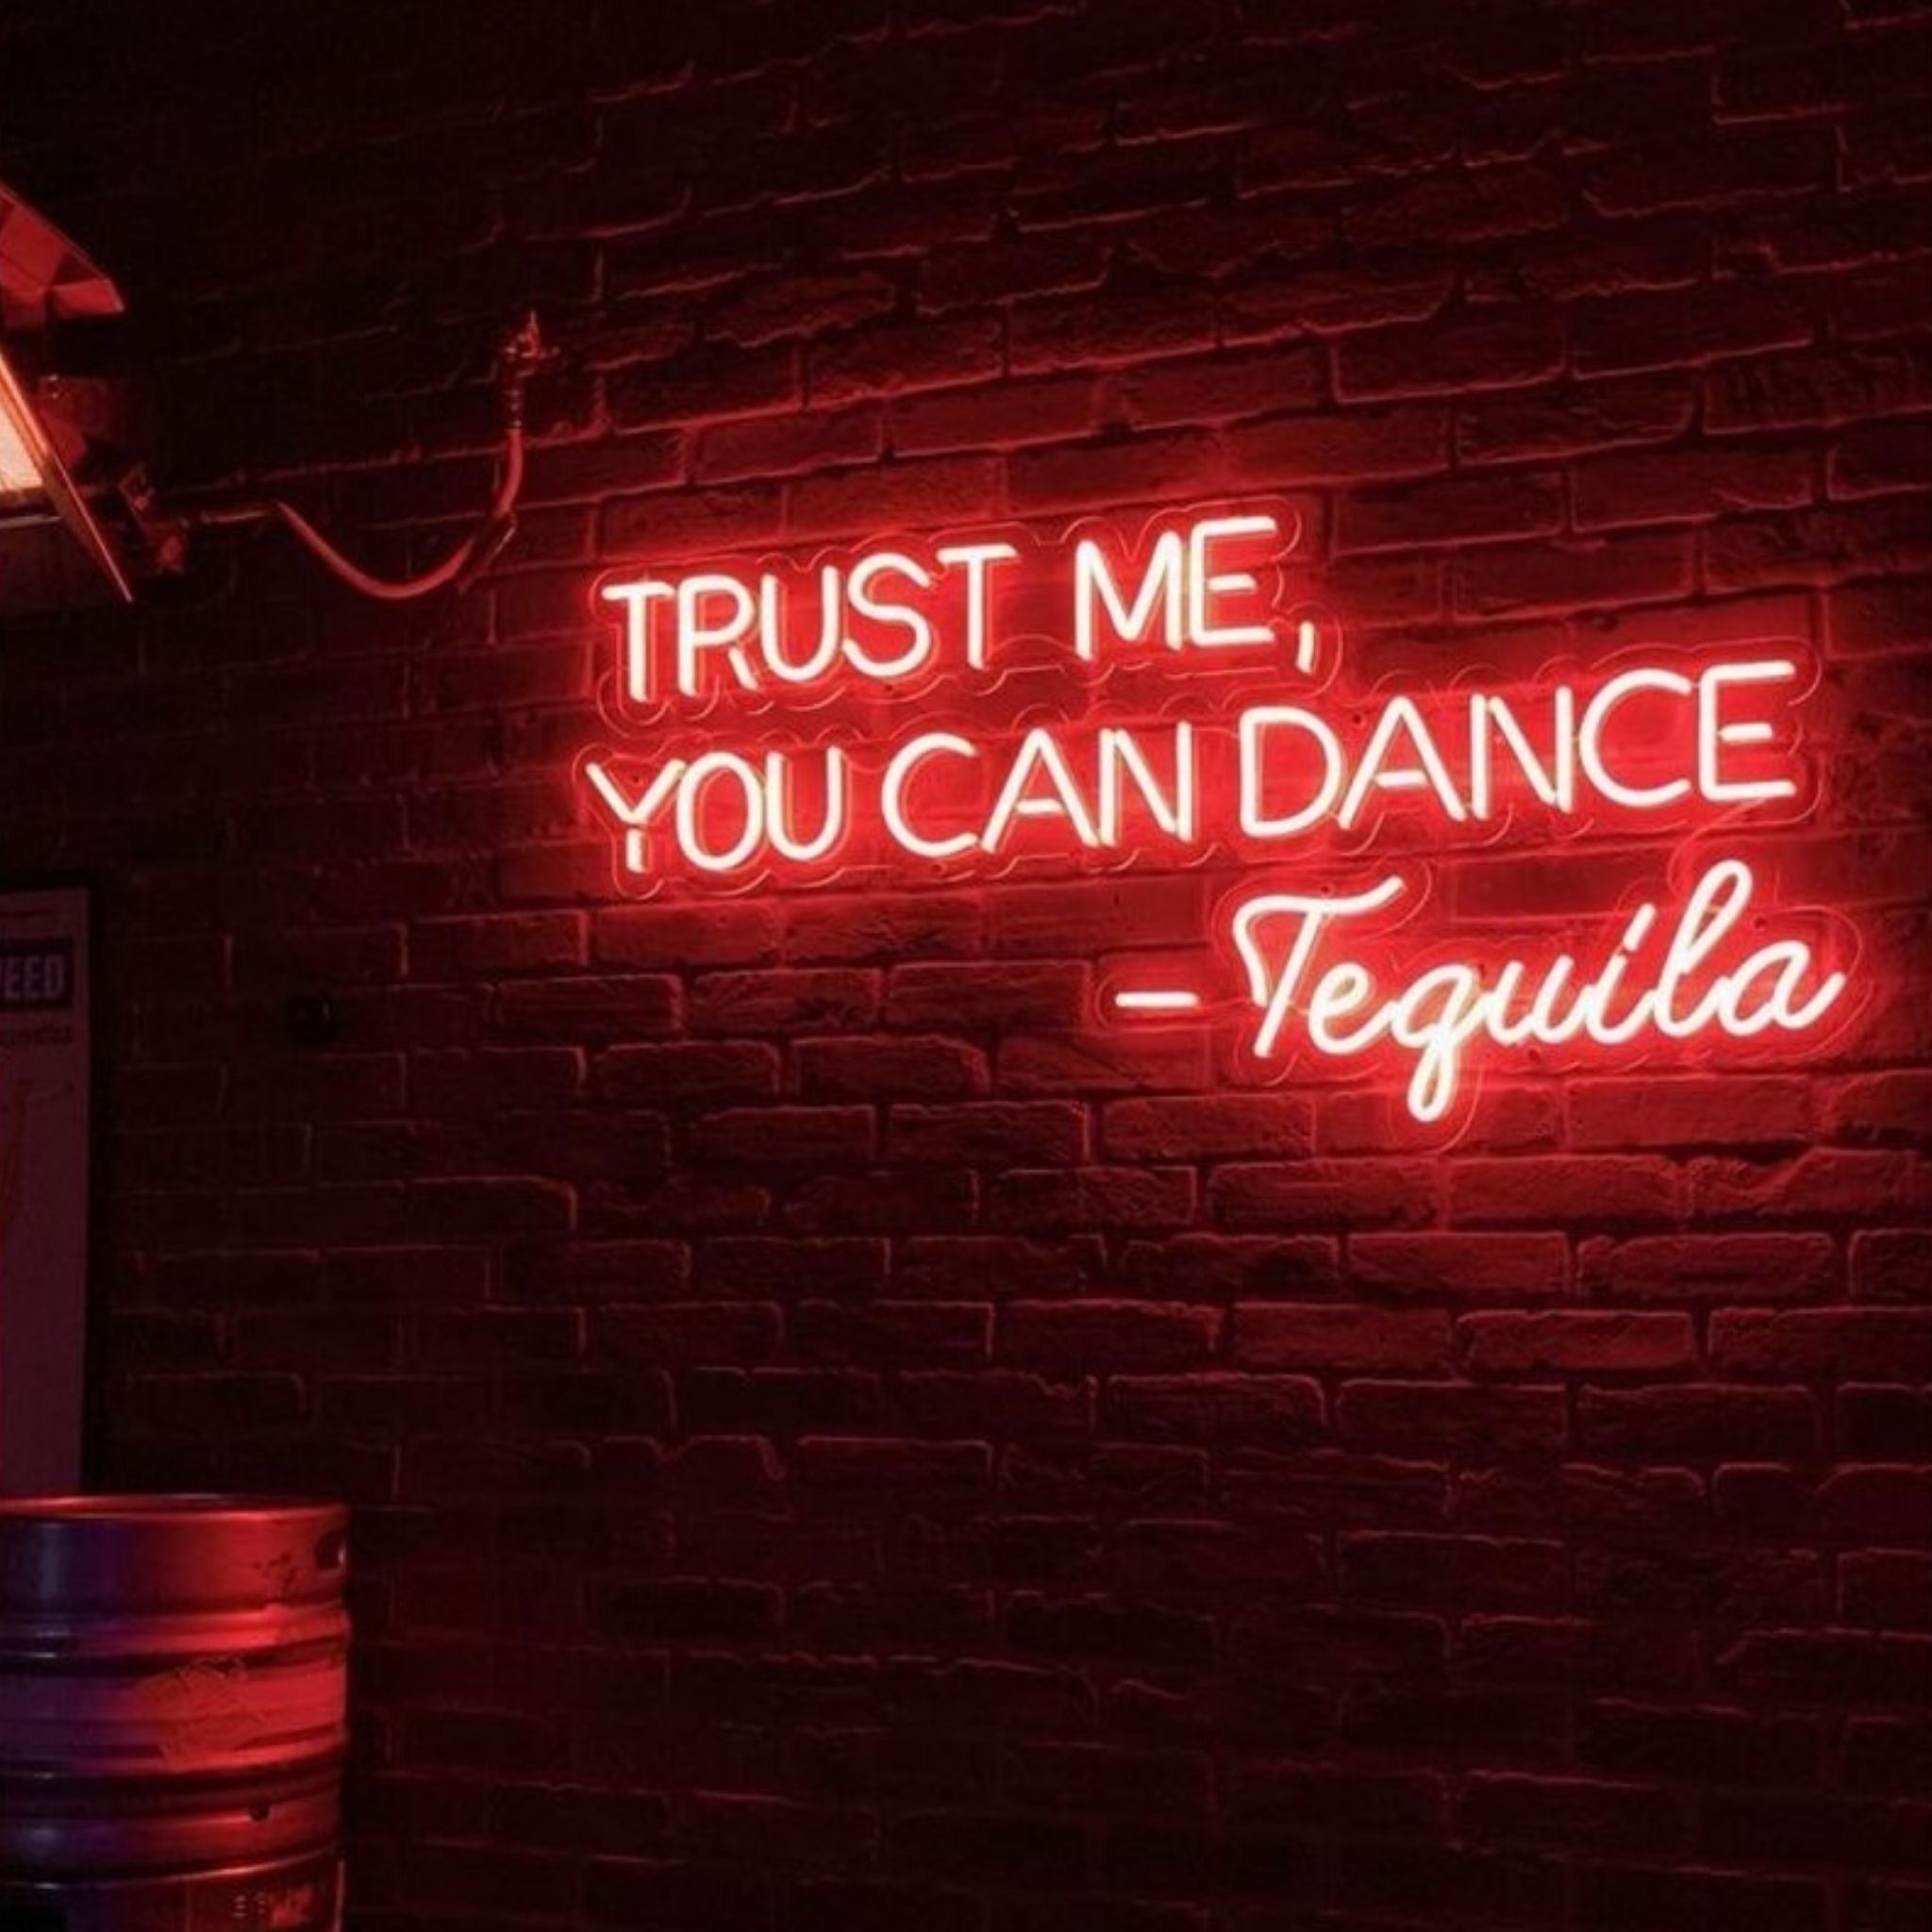 Radiant Rhythm: Trust Me, You Can Dance - Tequila Neon Art